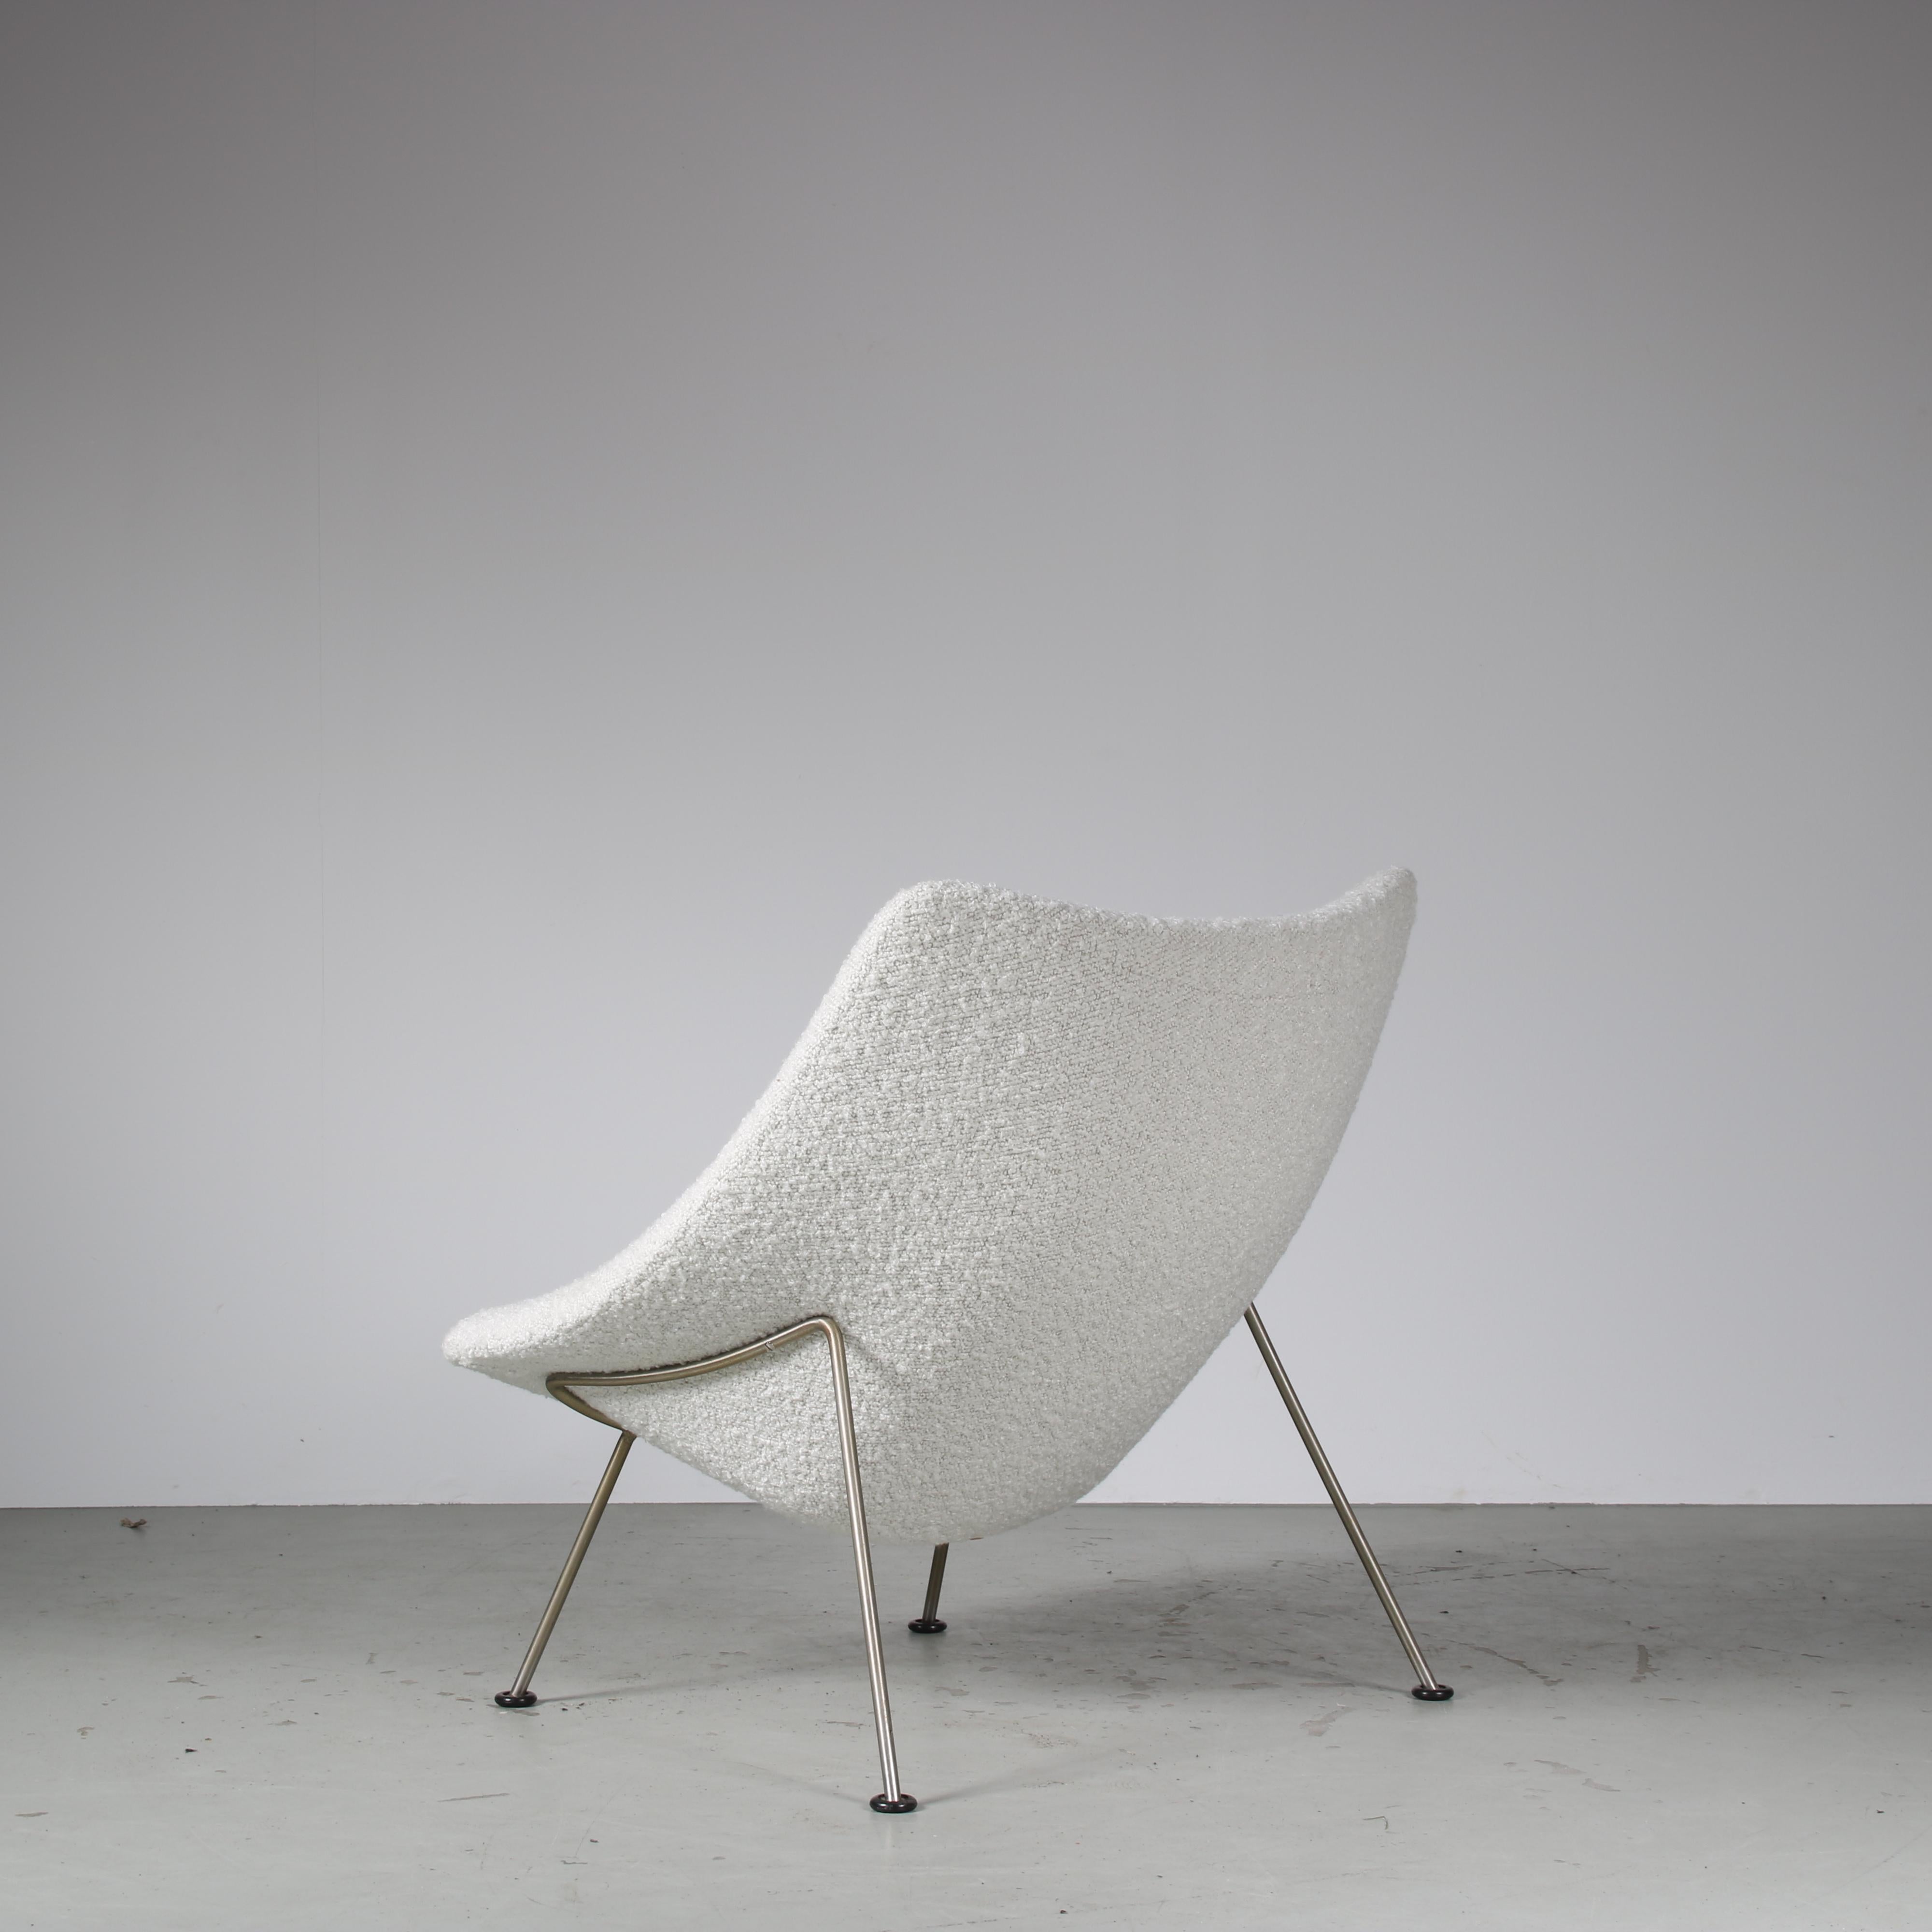 Mid-20th Century Pierre Paulin “Oyster” Chair for Artifort, Netherlands 1960